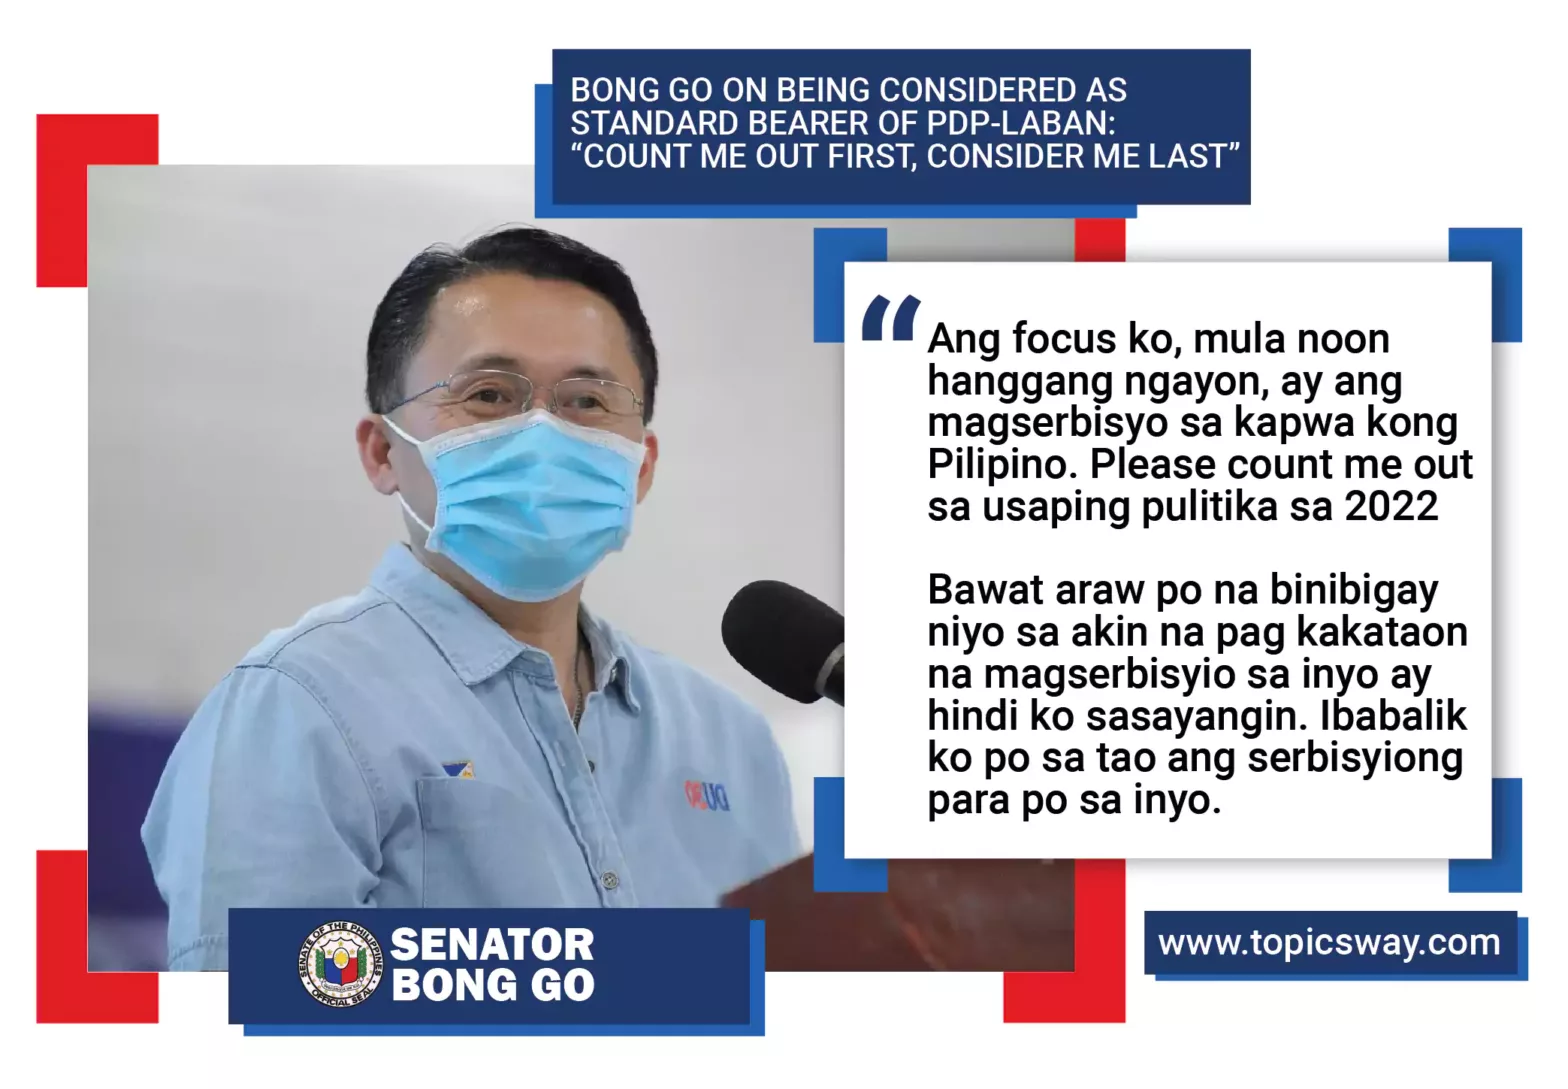 BONG GO ON BEING CONSIDERED AS STANDARD BEARER OF PDP-LABAN:  “COUNT ME OUT FIRST, CONSIDER ME LAST”